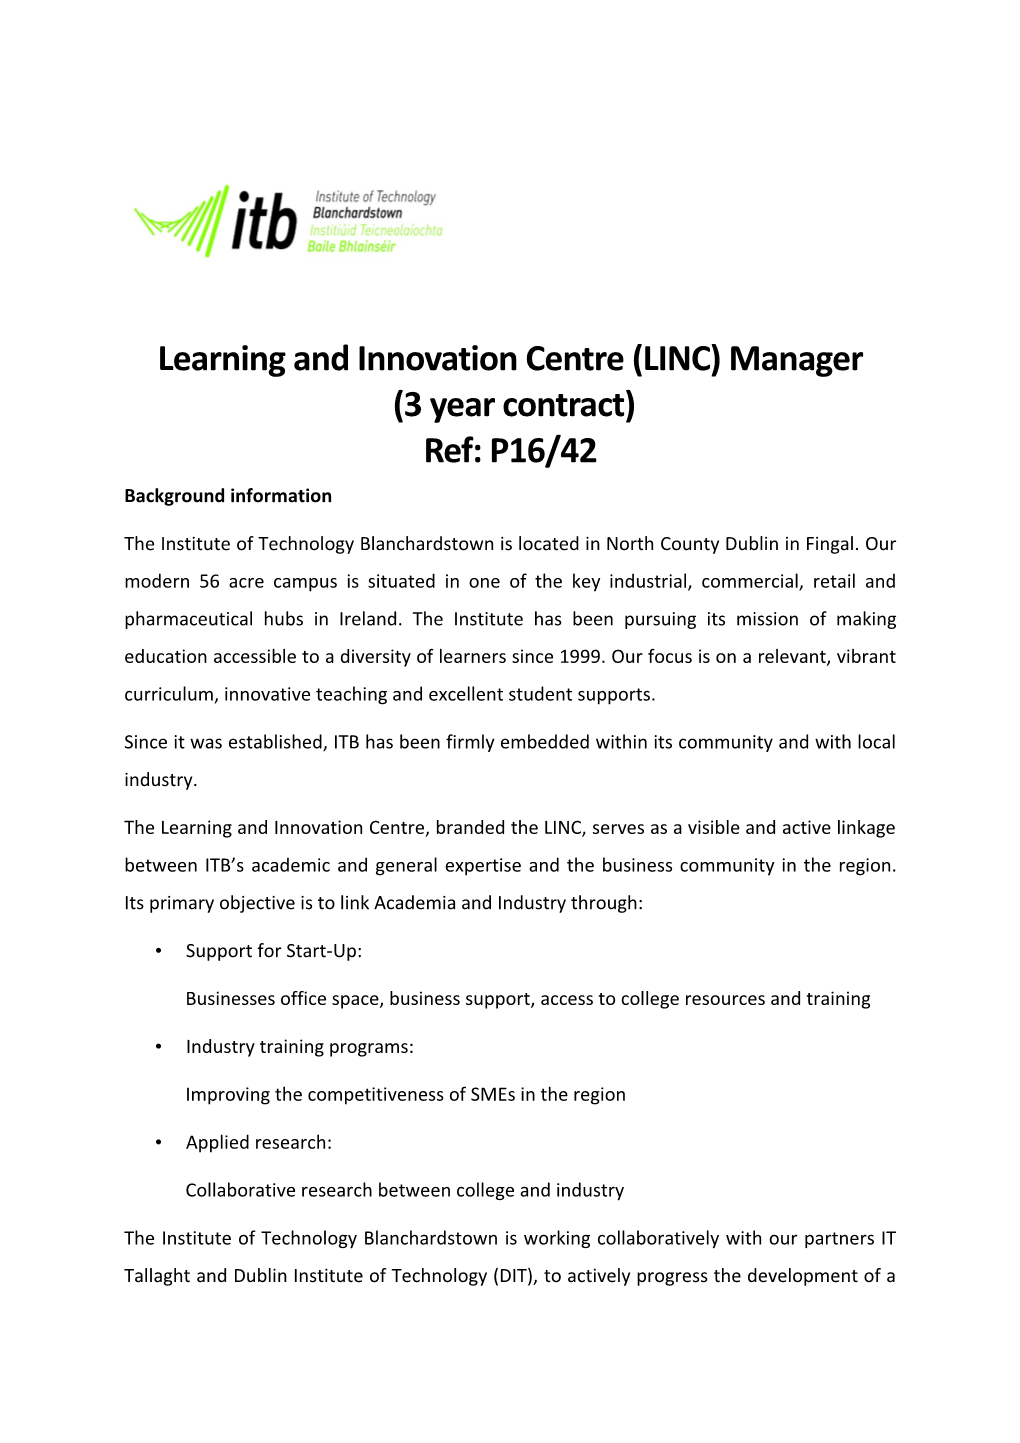 Learning and Innovation Centre (LINC)Manager